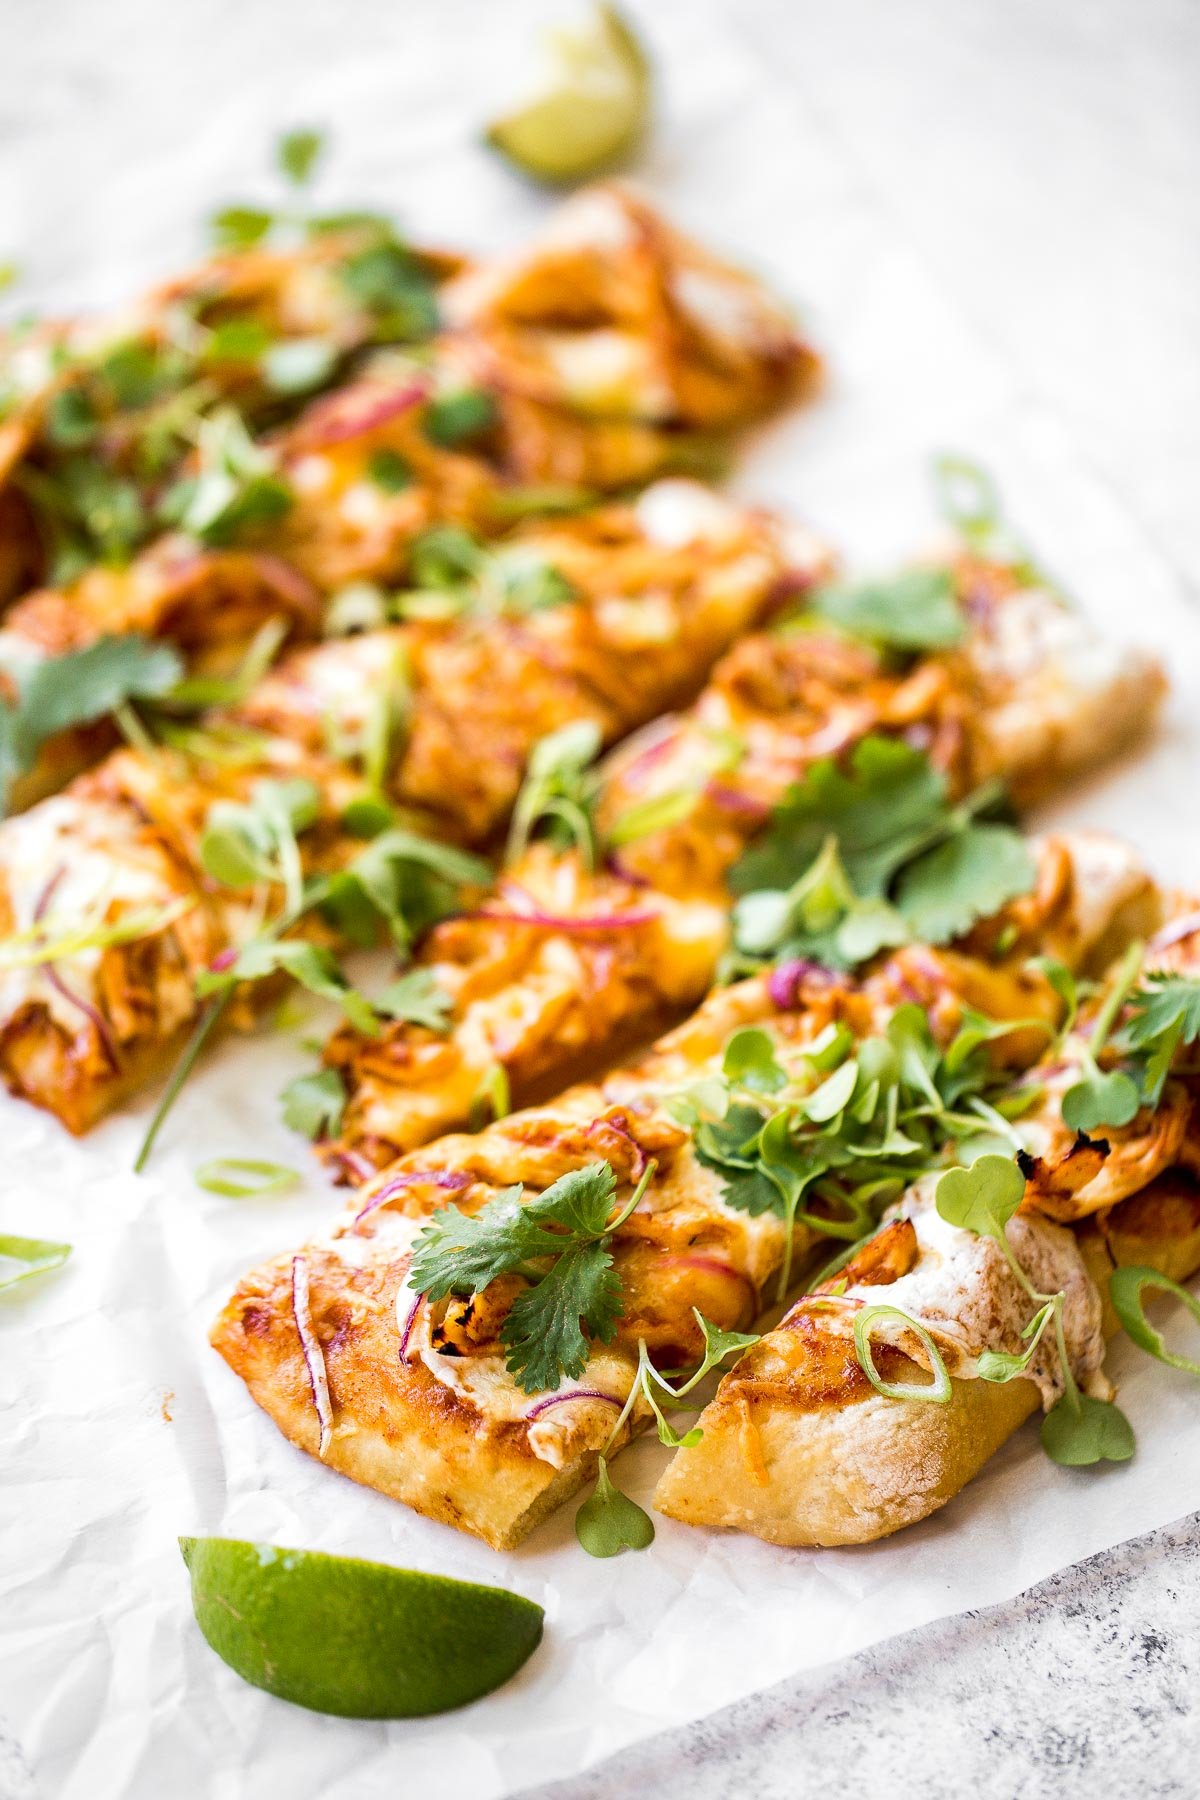 Forget delivery and make sweet, tangy, and smoky BBQ chicken pizza from the comfort of your own home in under 30 minutes. The easiest weeknight dinner. | aheadofthyme.com